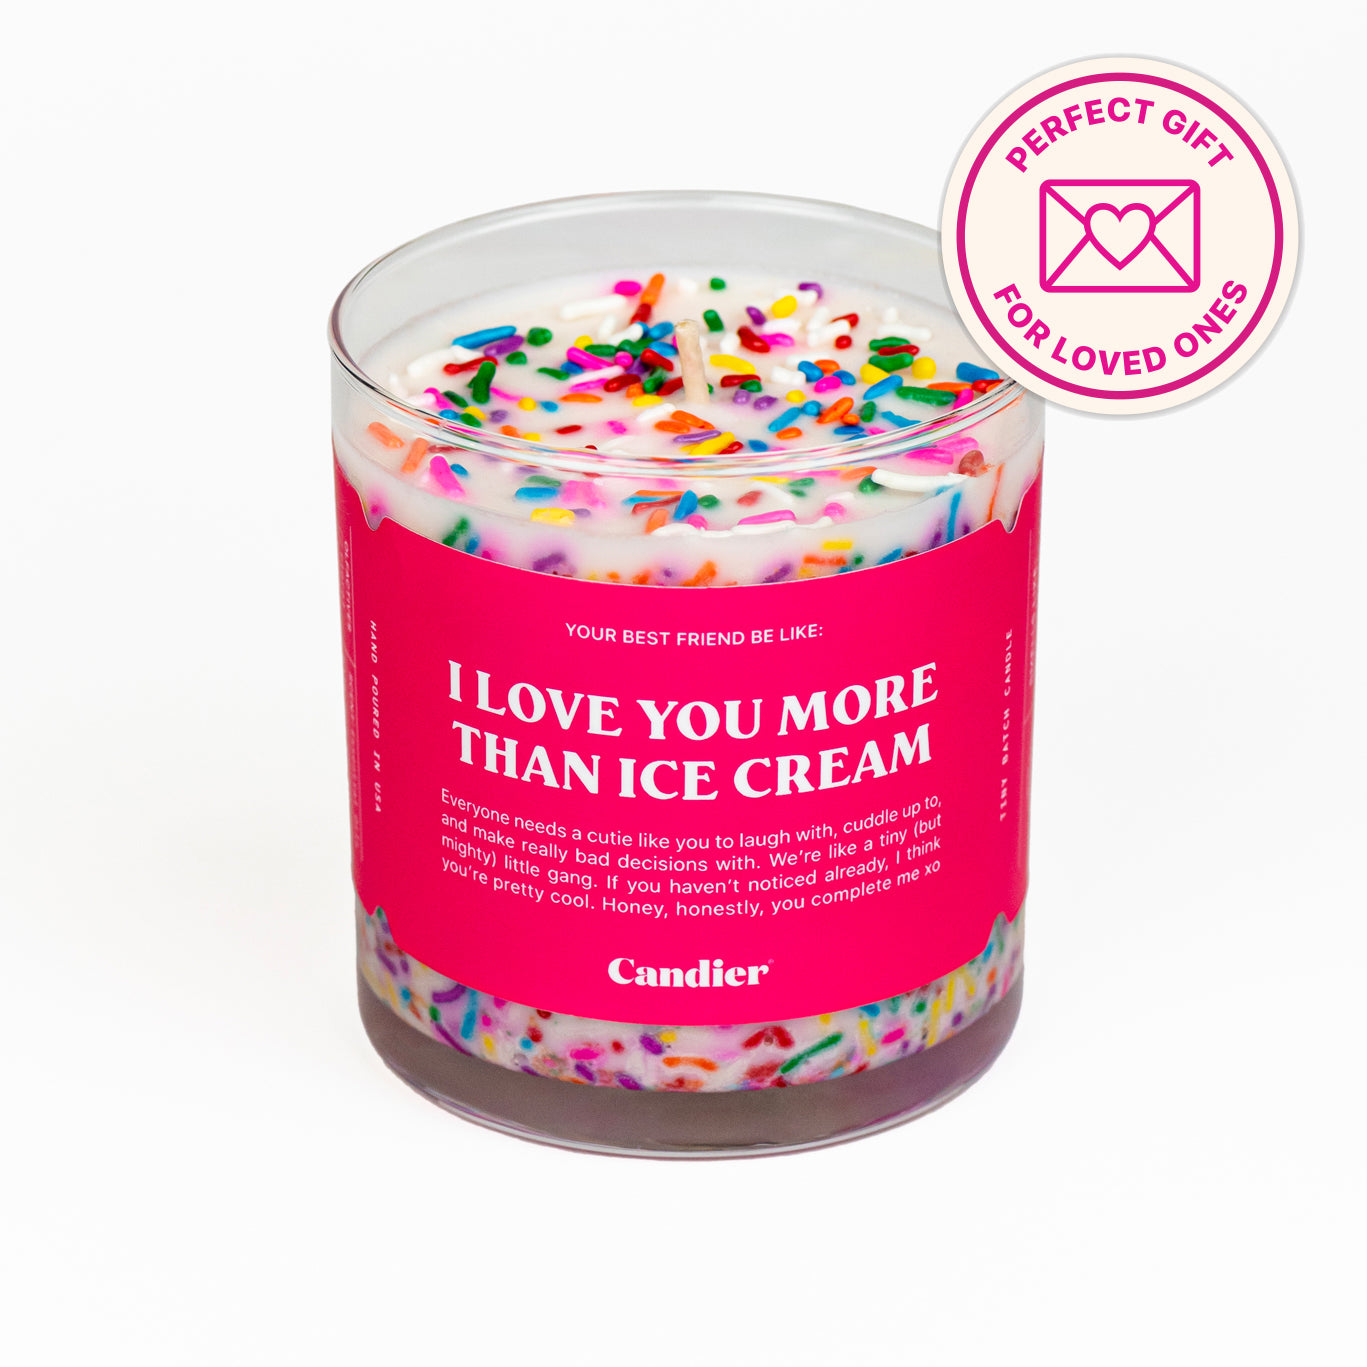 A colorful candle with a label that's reads I love you more than ice cream, and a badge that says perfect gift for loved ones 